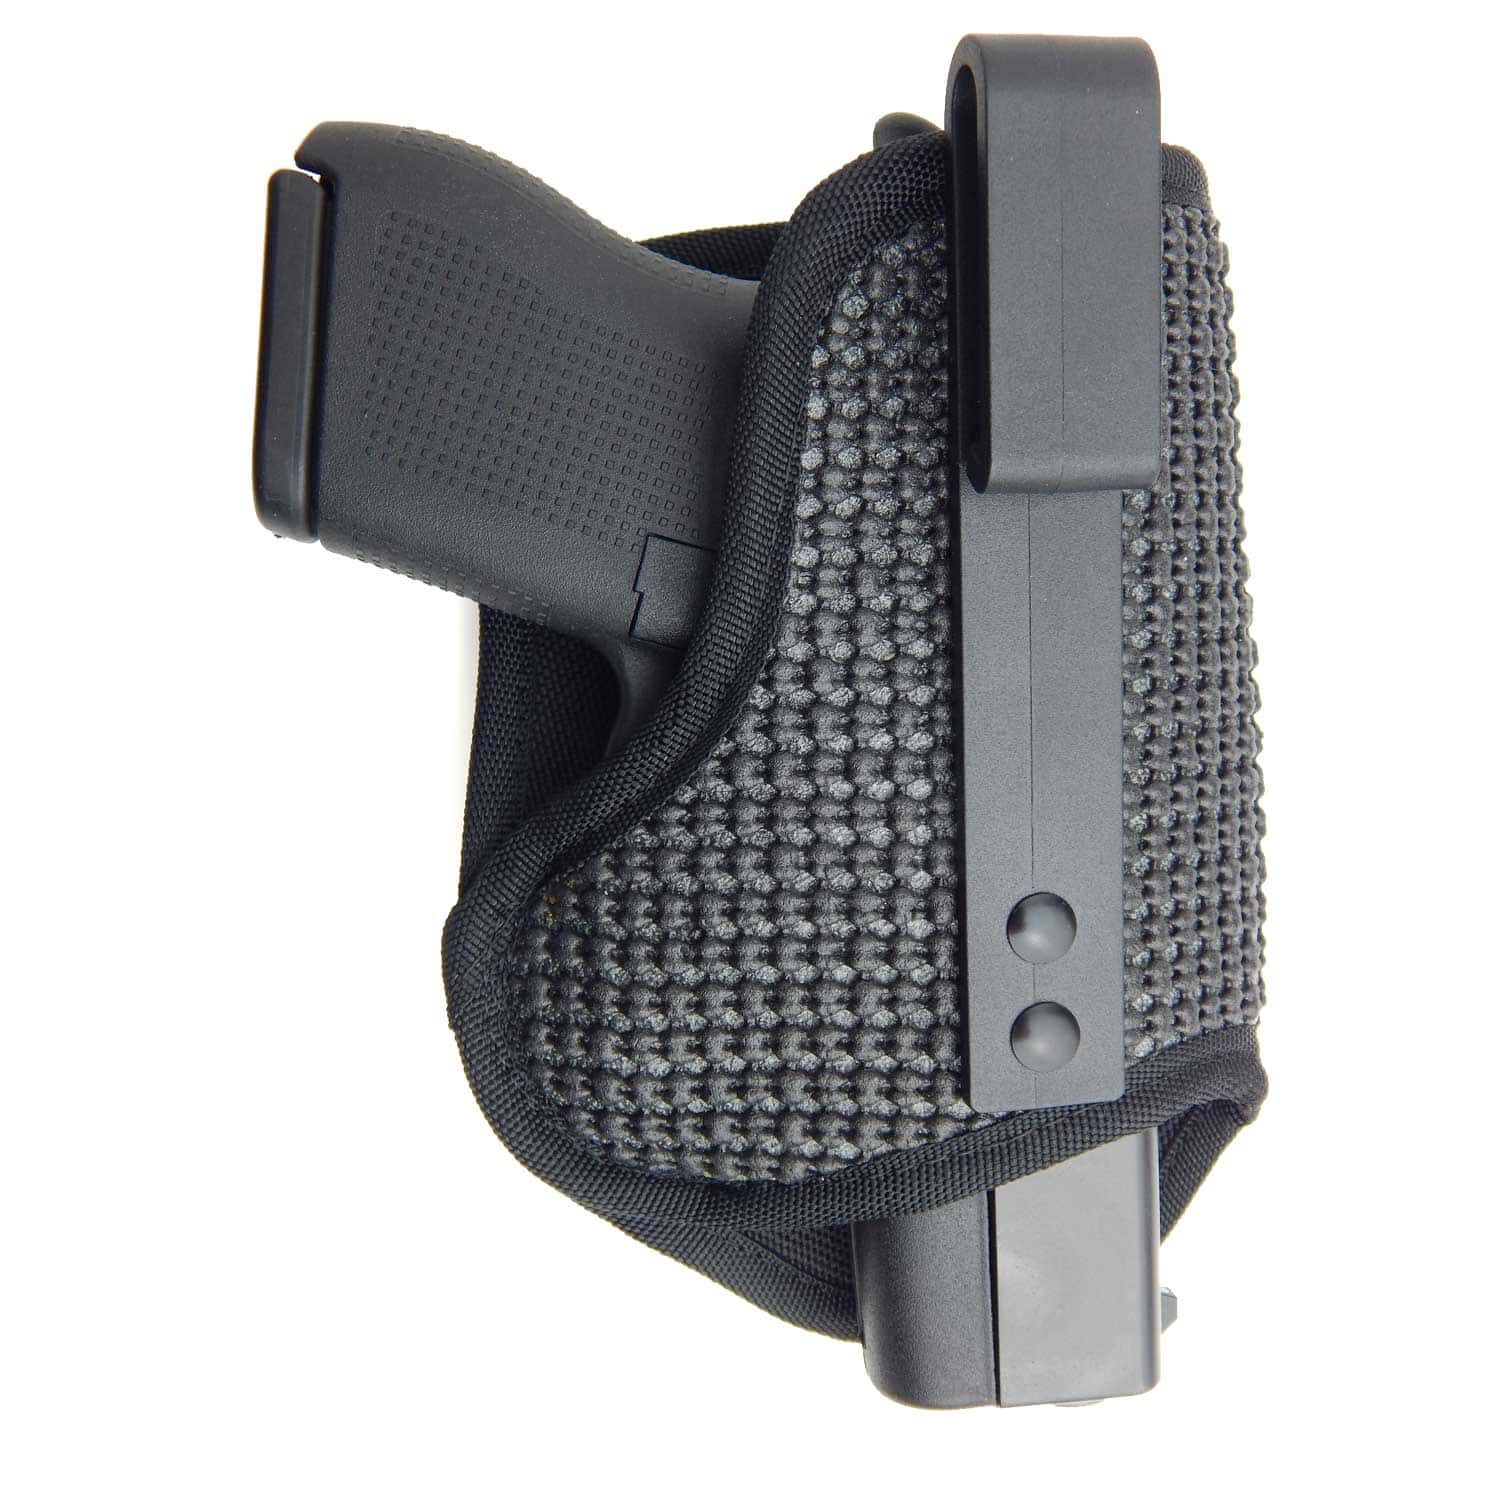 2. Factors to Consider When Choosing a Concealed Carry Holster for Deep Winter